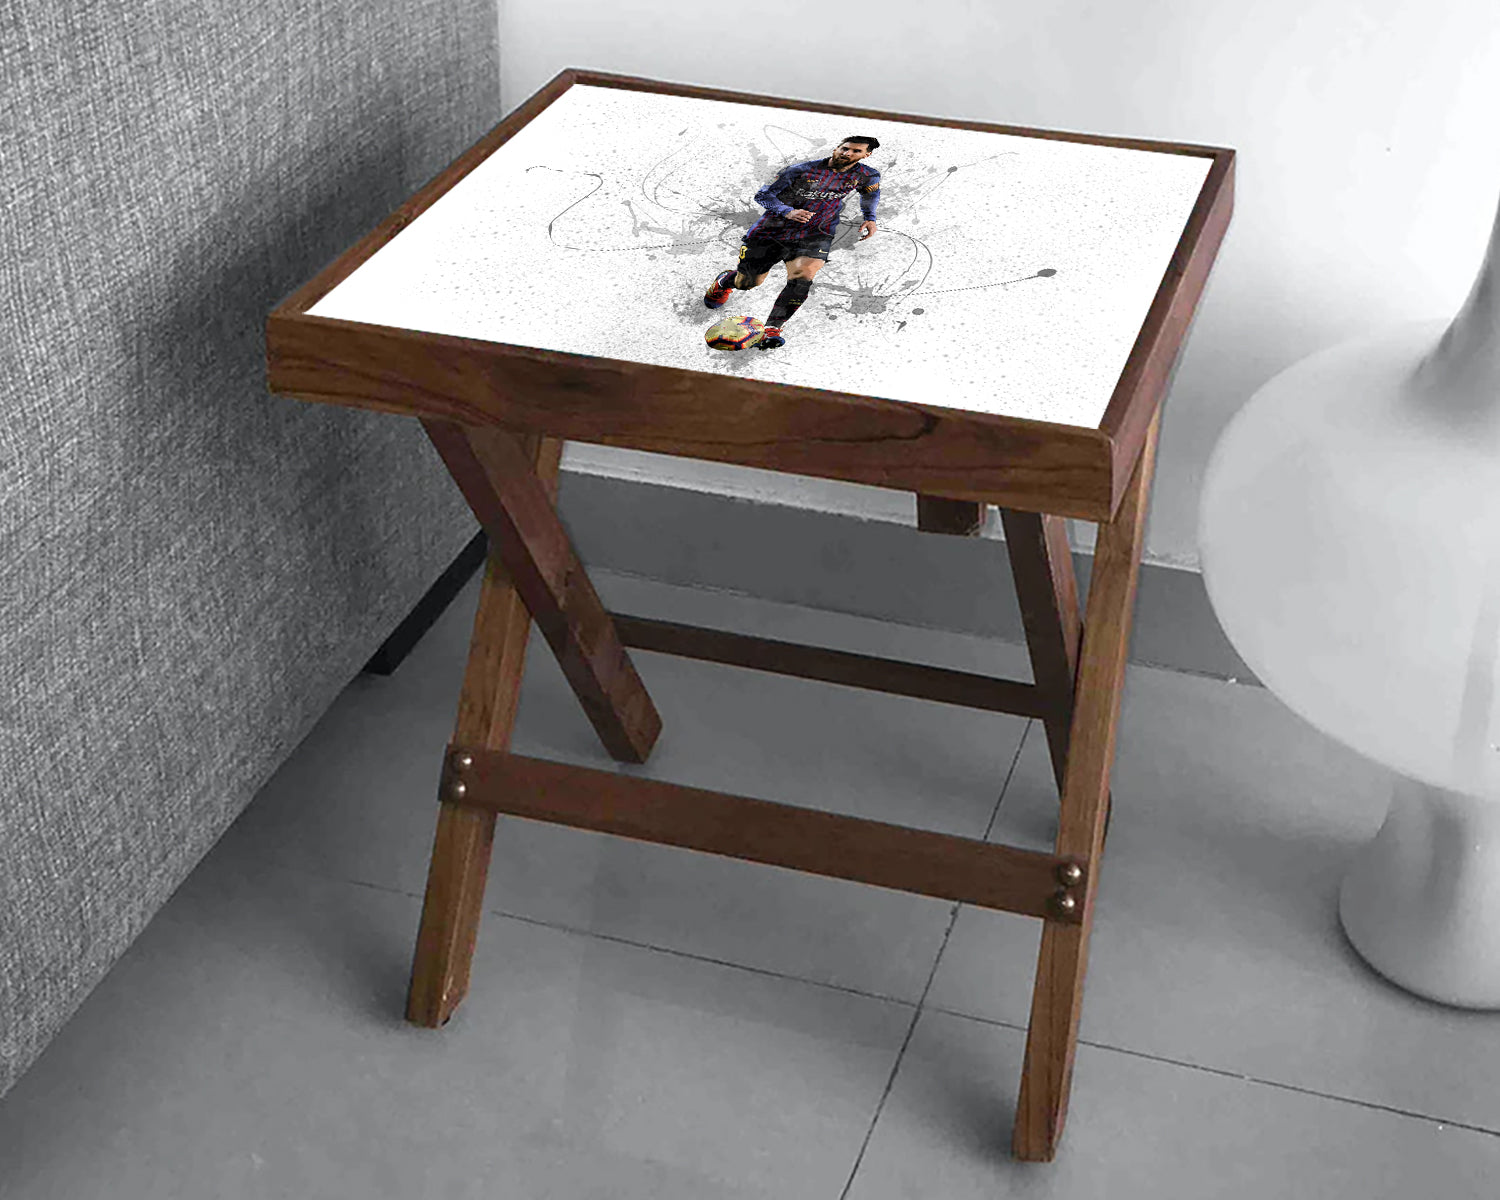 Lionel Messi Splash Effect Coffee and Laptop Table 